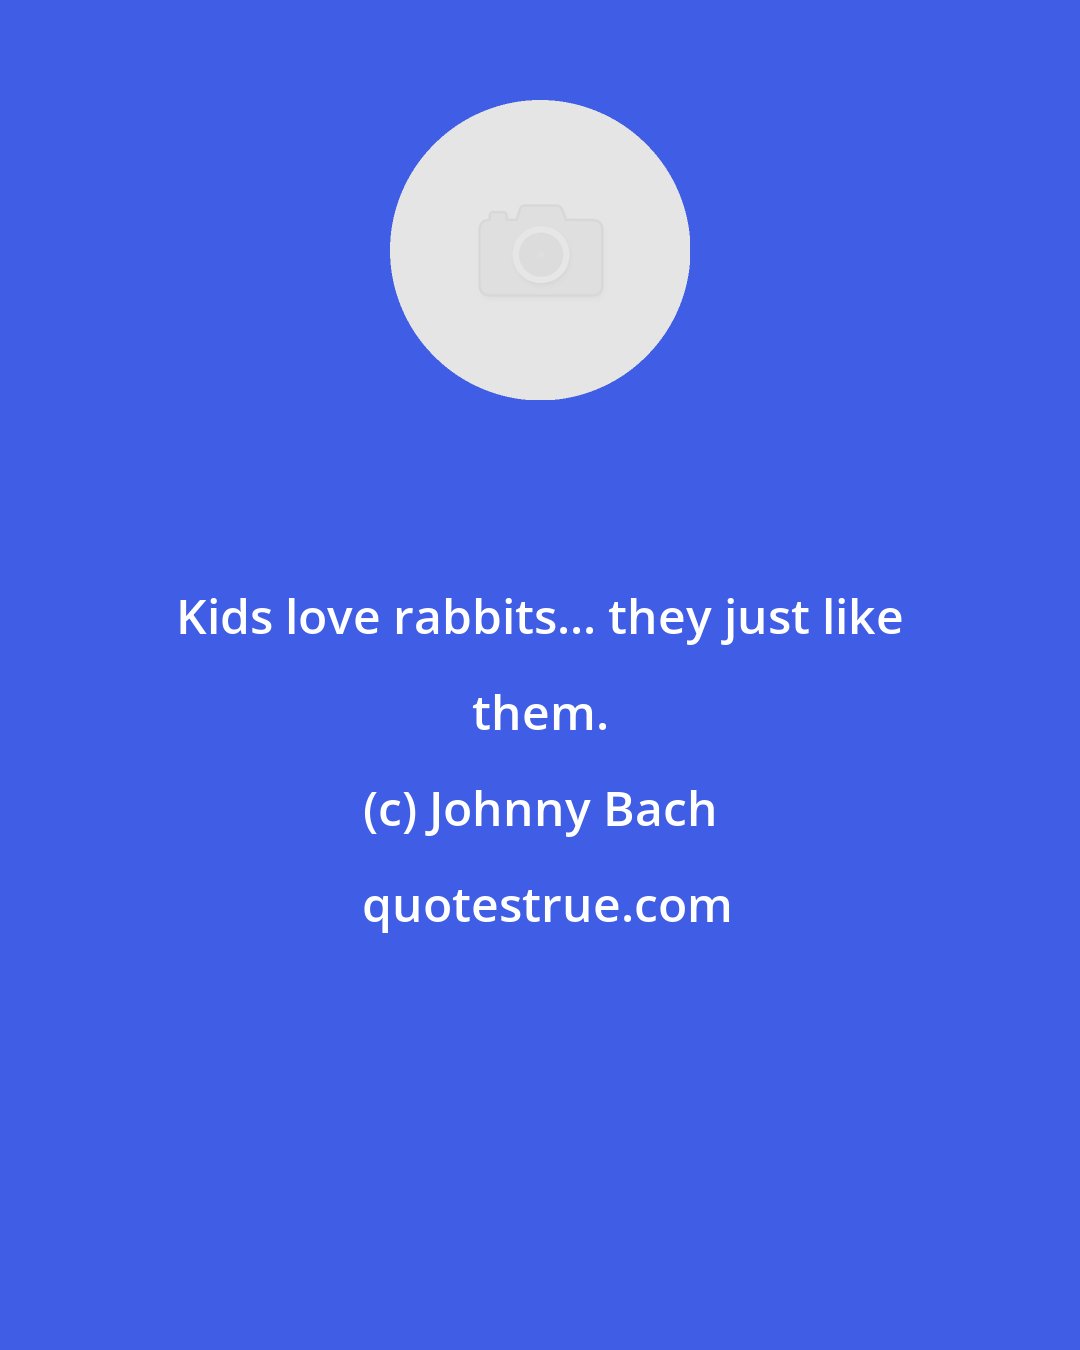 Johnny Bach: Kids love rabbits... they just like them.